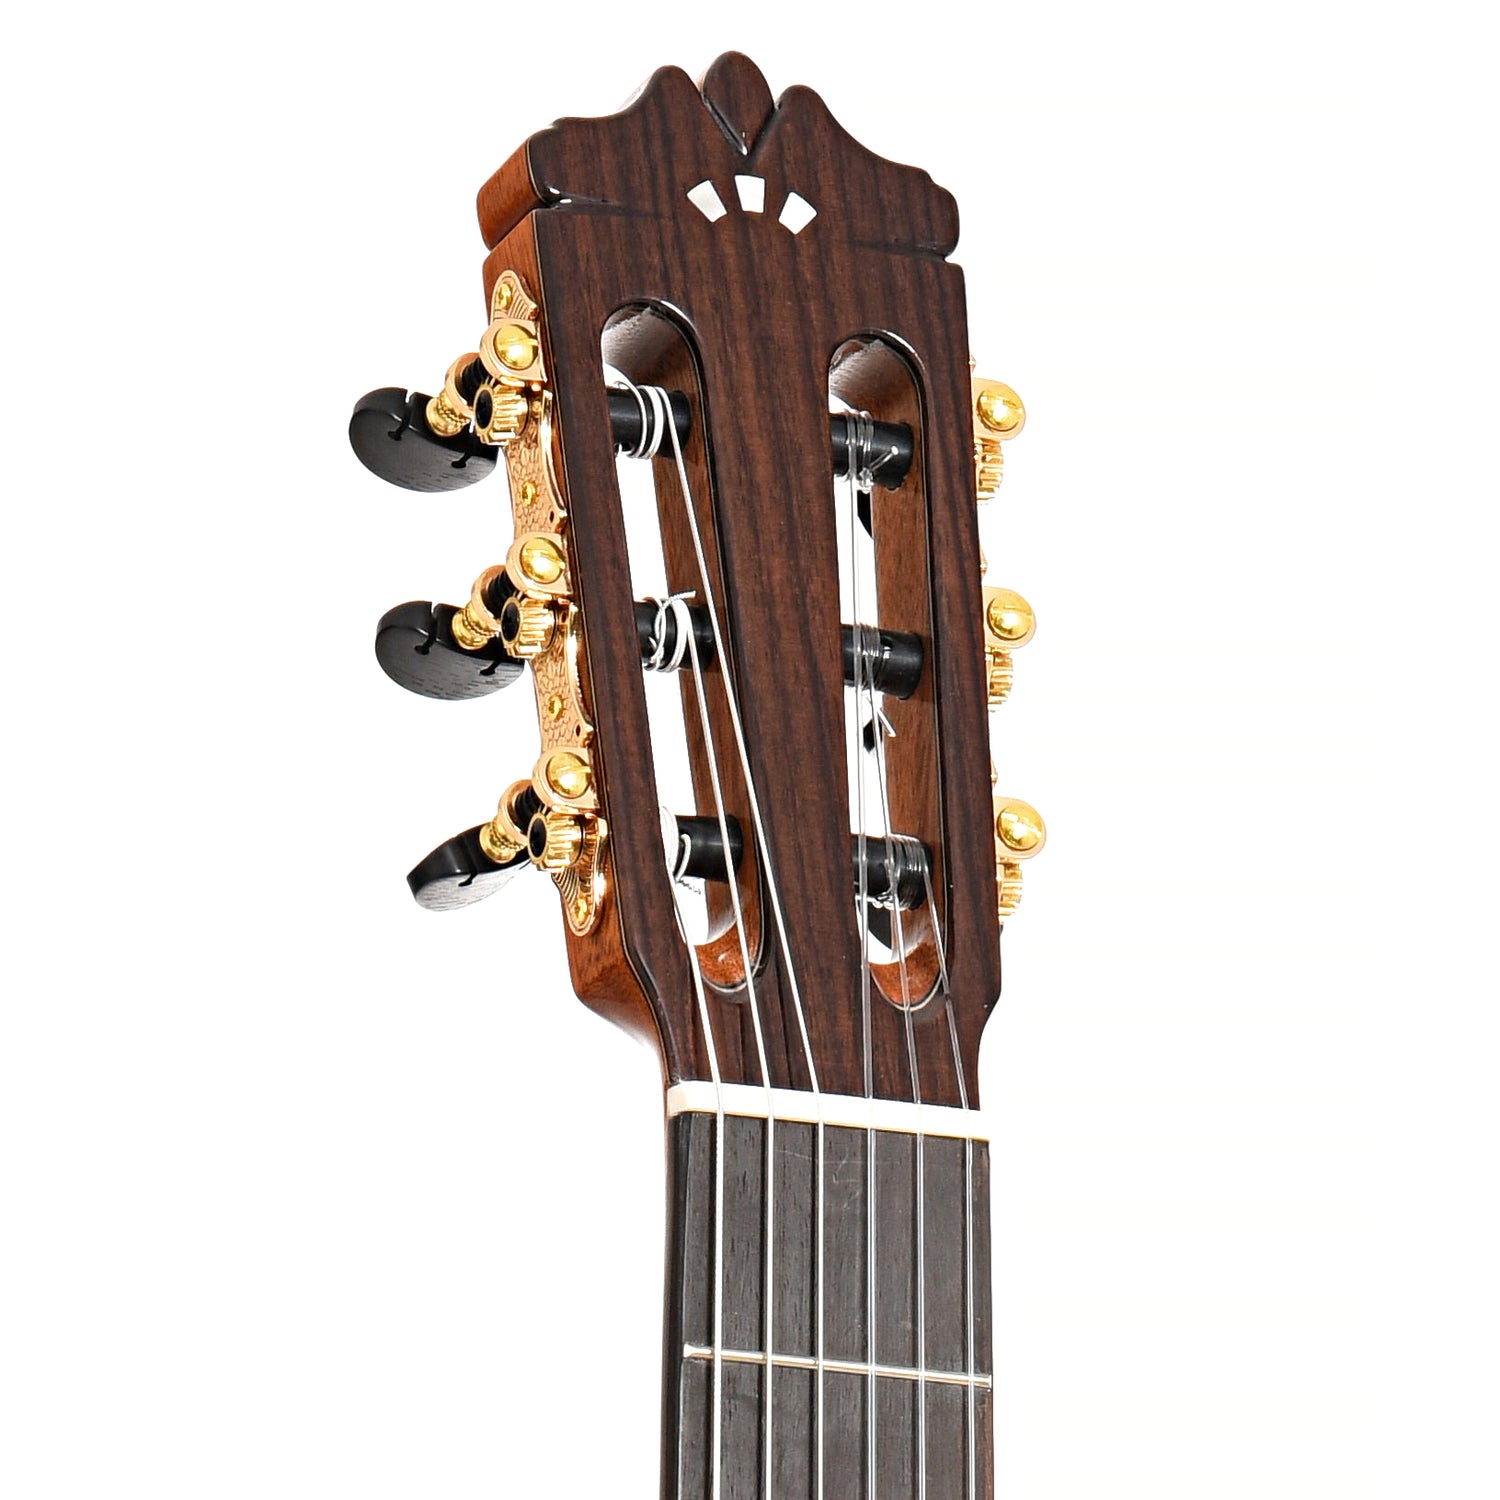 Image 7 of Cordoba C9 Classical Guitar and Case - SKU# CORC9C : Product Type Classical & Flamenco Guitars : Elderly Instruments